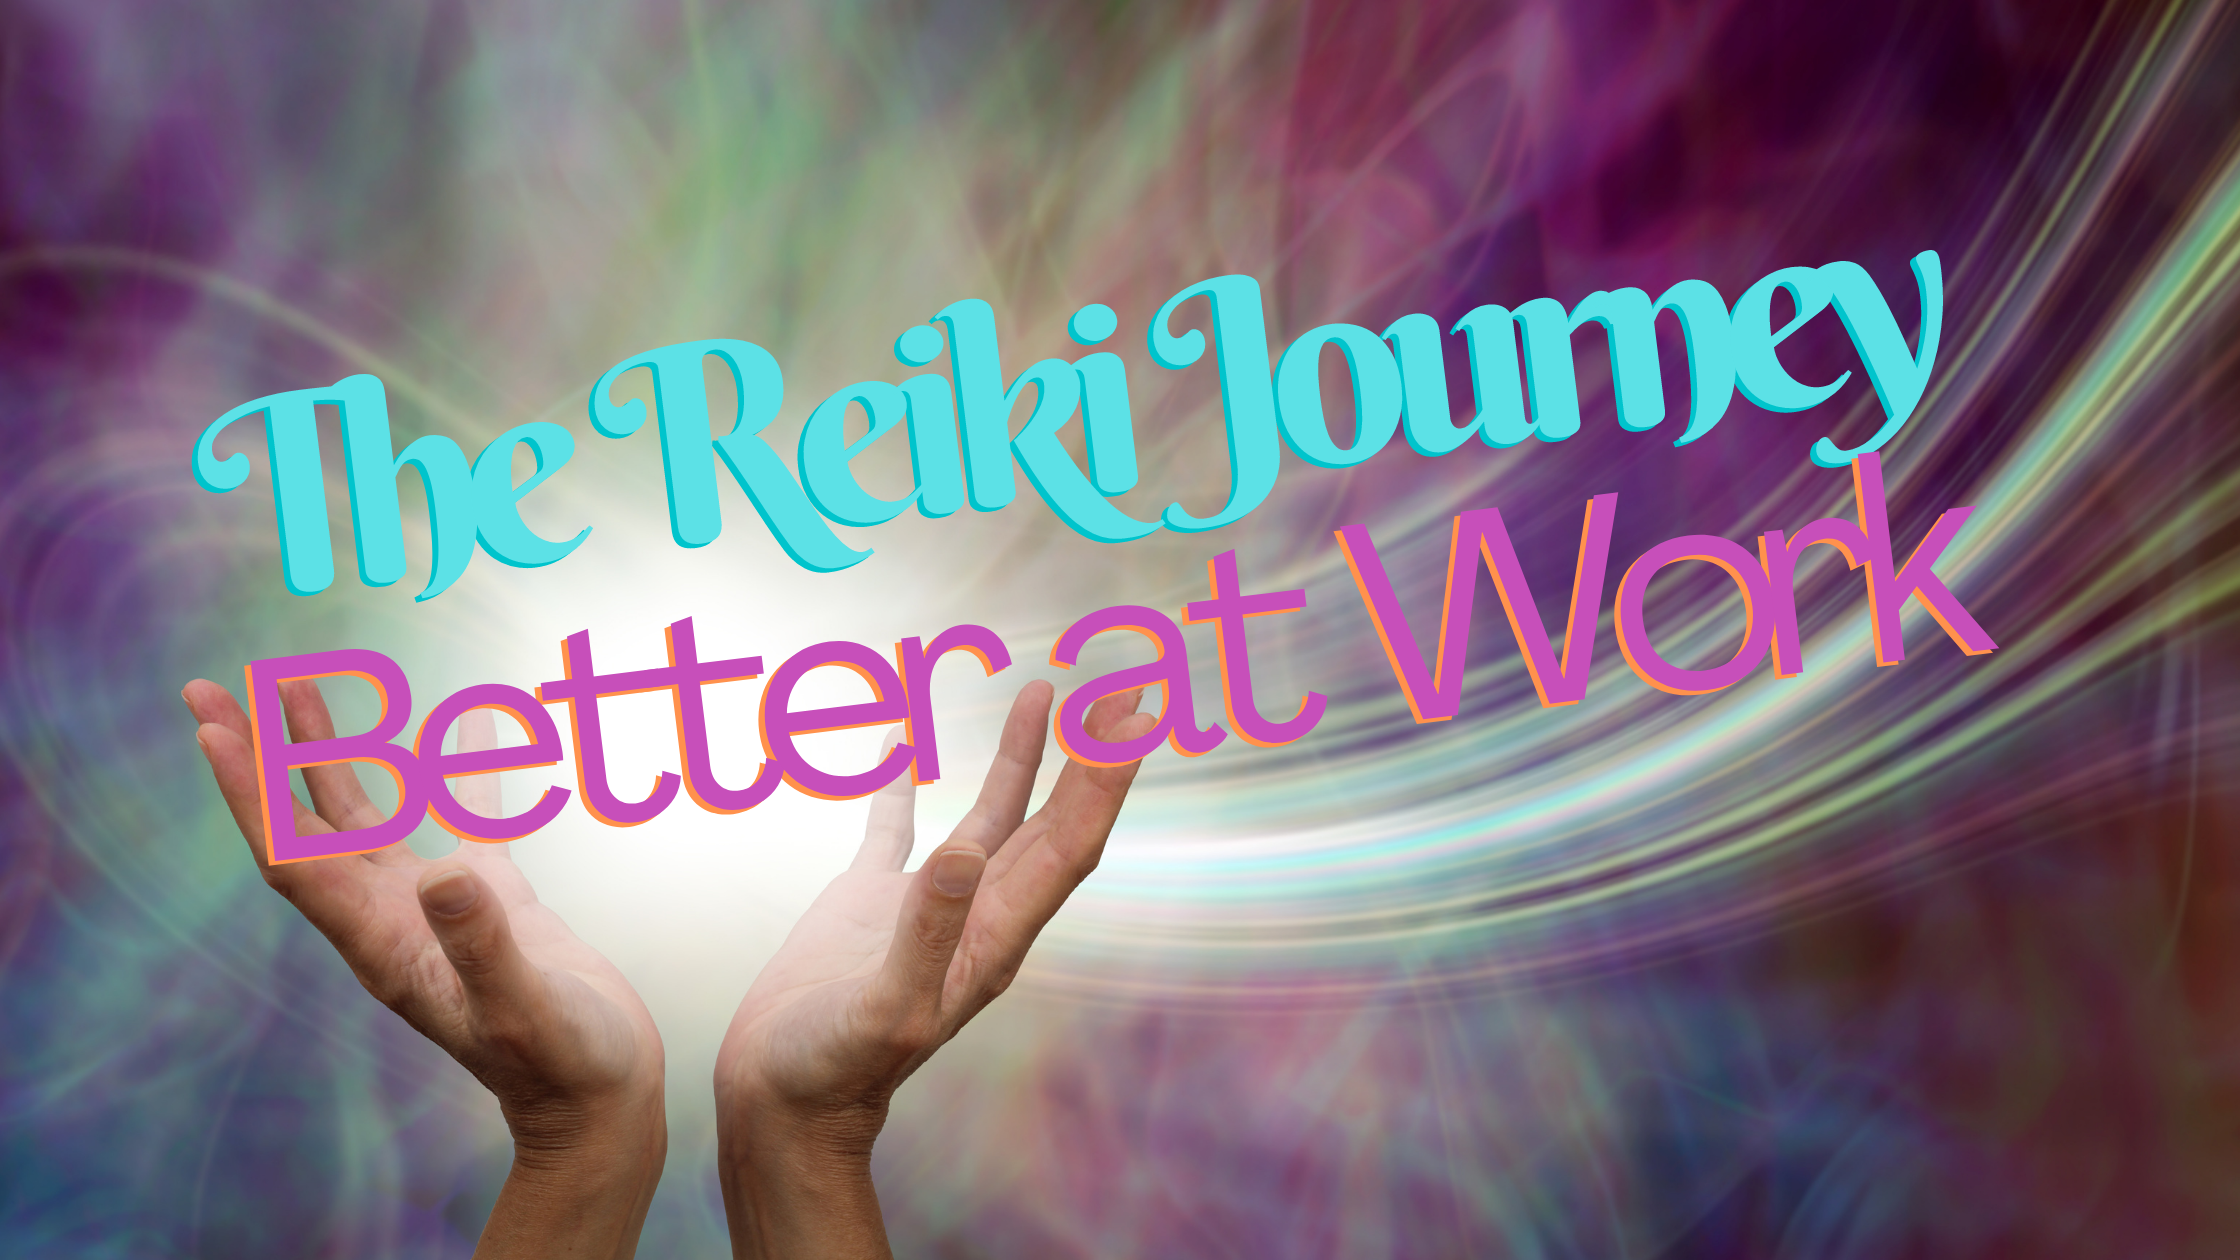 The Reiki Journey: Better at Work